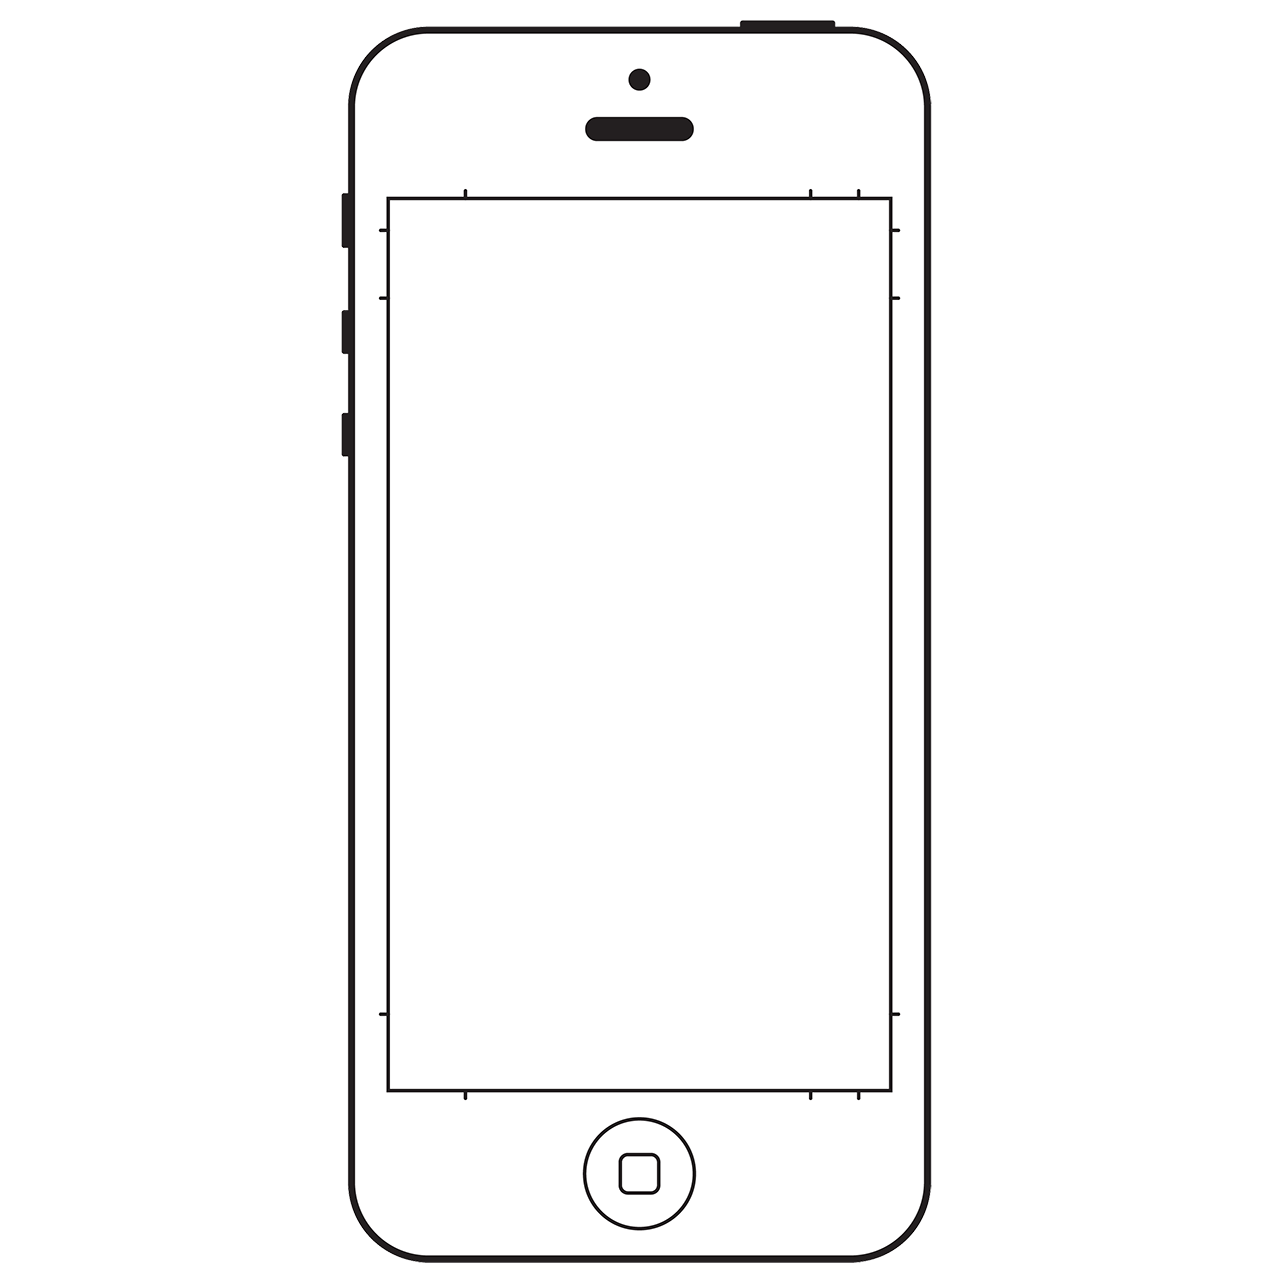 How to draw a realistic iphone 4 with photoshop